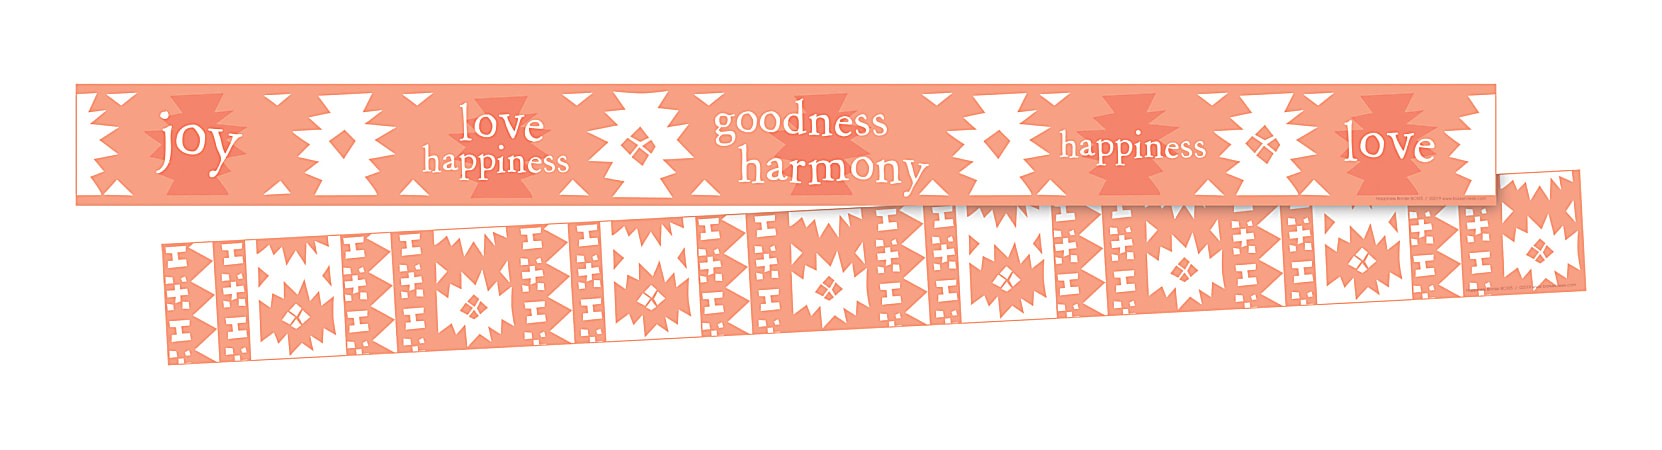 Barker Creek Double-Sided Border, 3" x 35", Happiness,